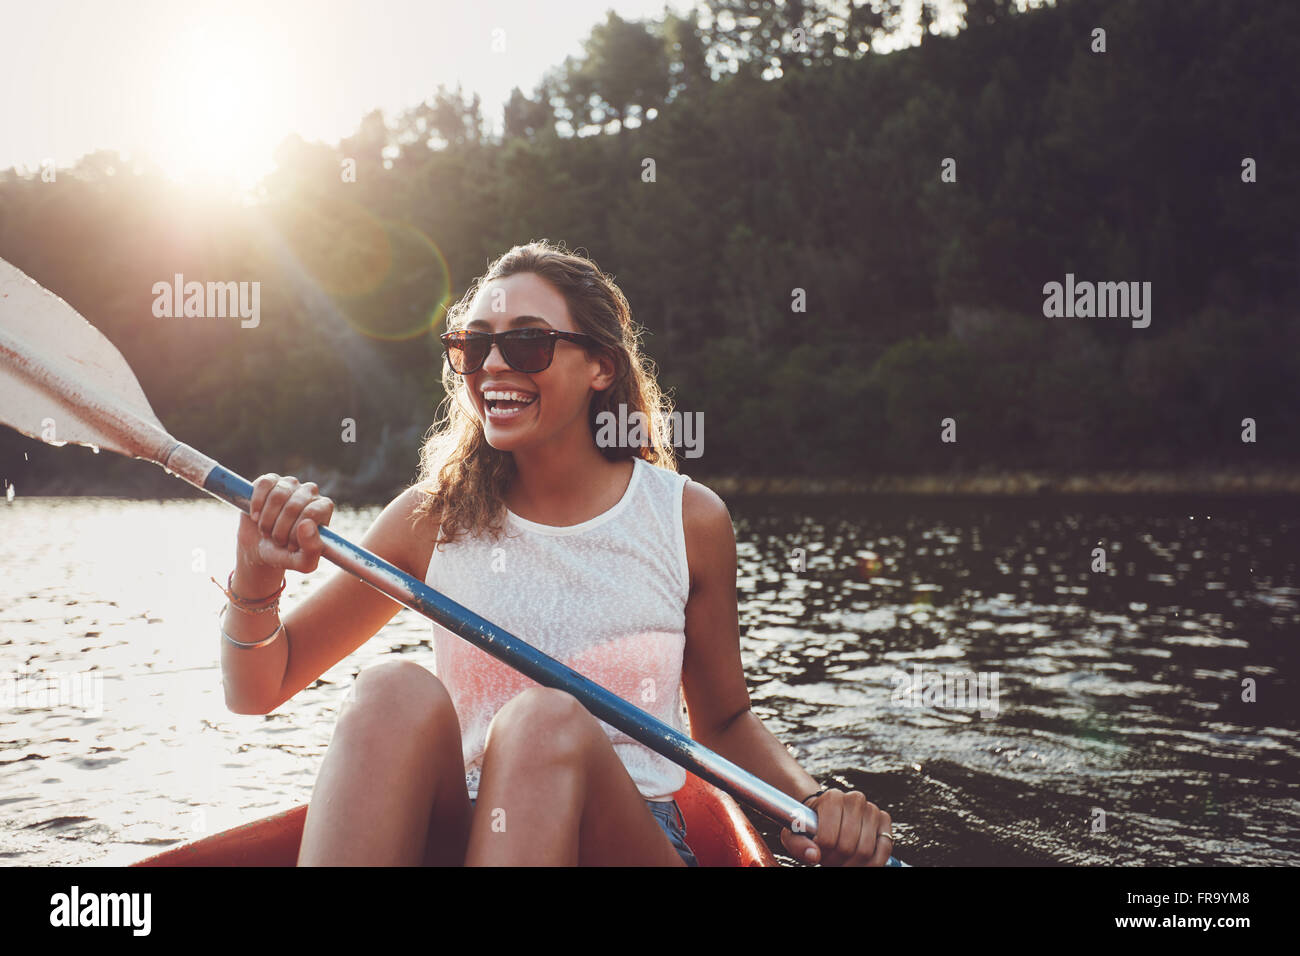 Smiling young woman kayaking on a lake. Happy young woman canoeing in a lake on a summer day. Stock Photo